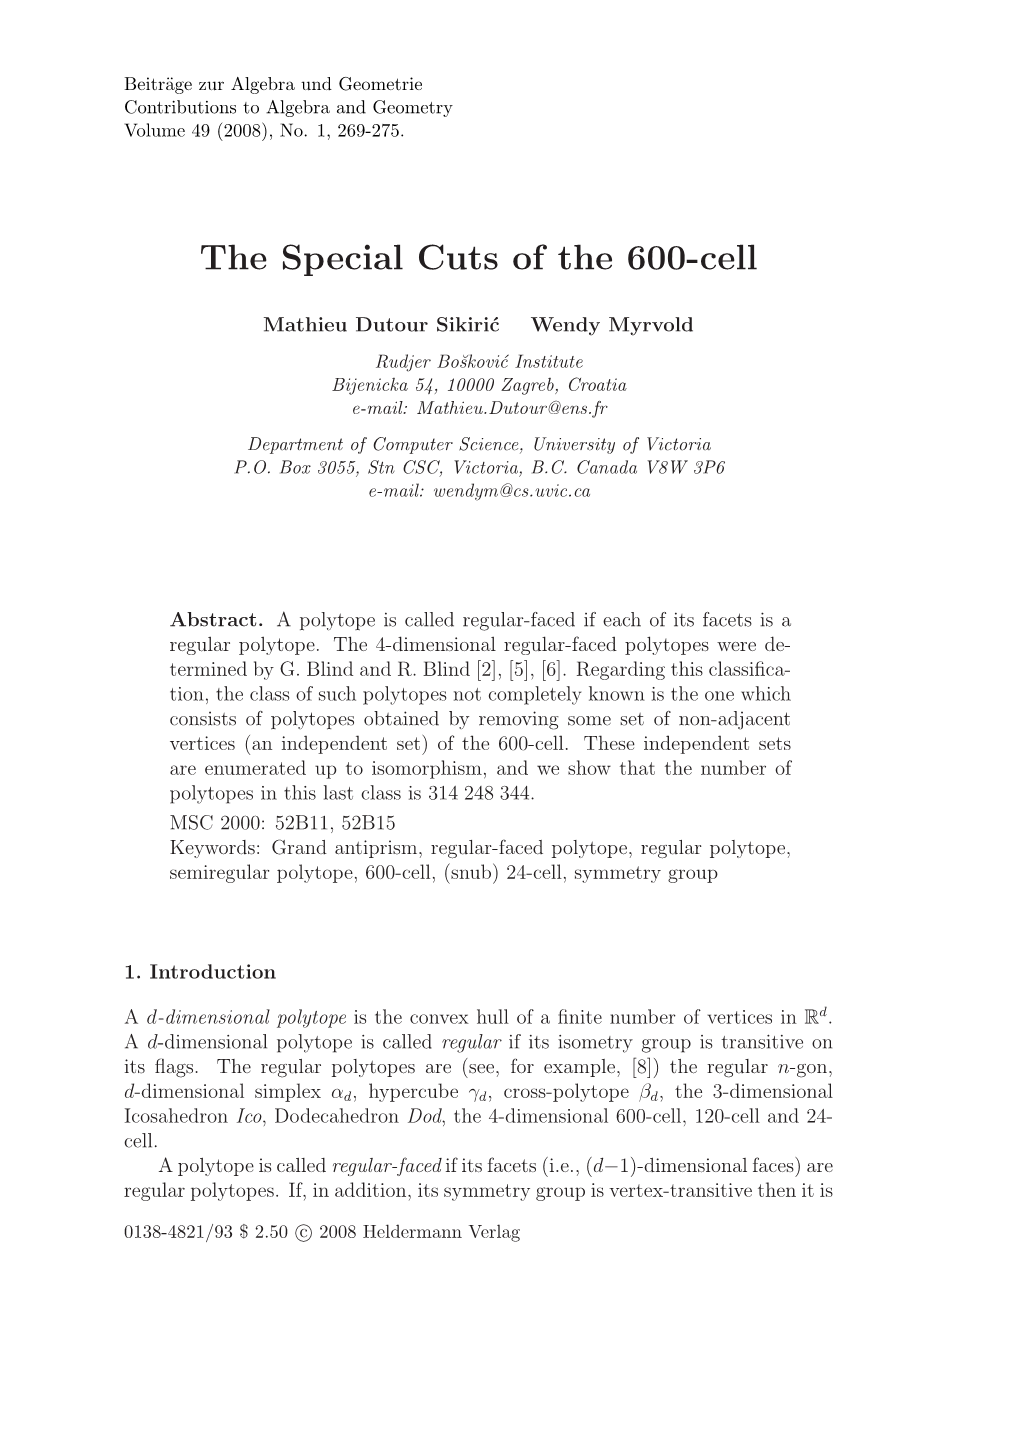 The Special Cuts of the 600-Cell